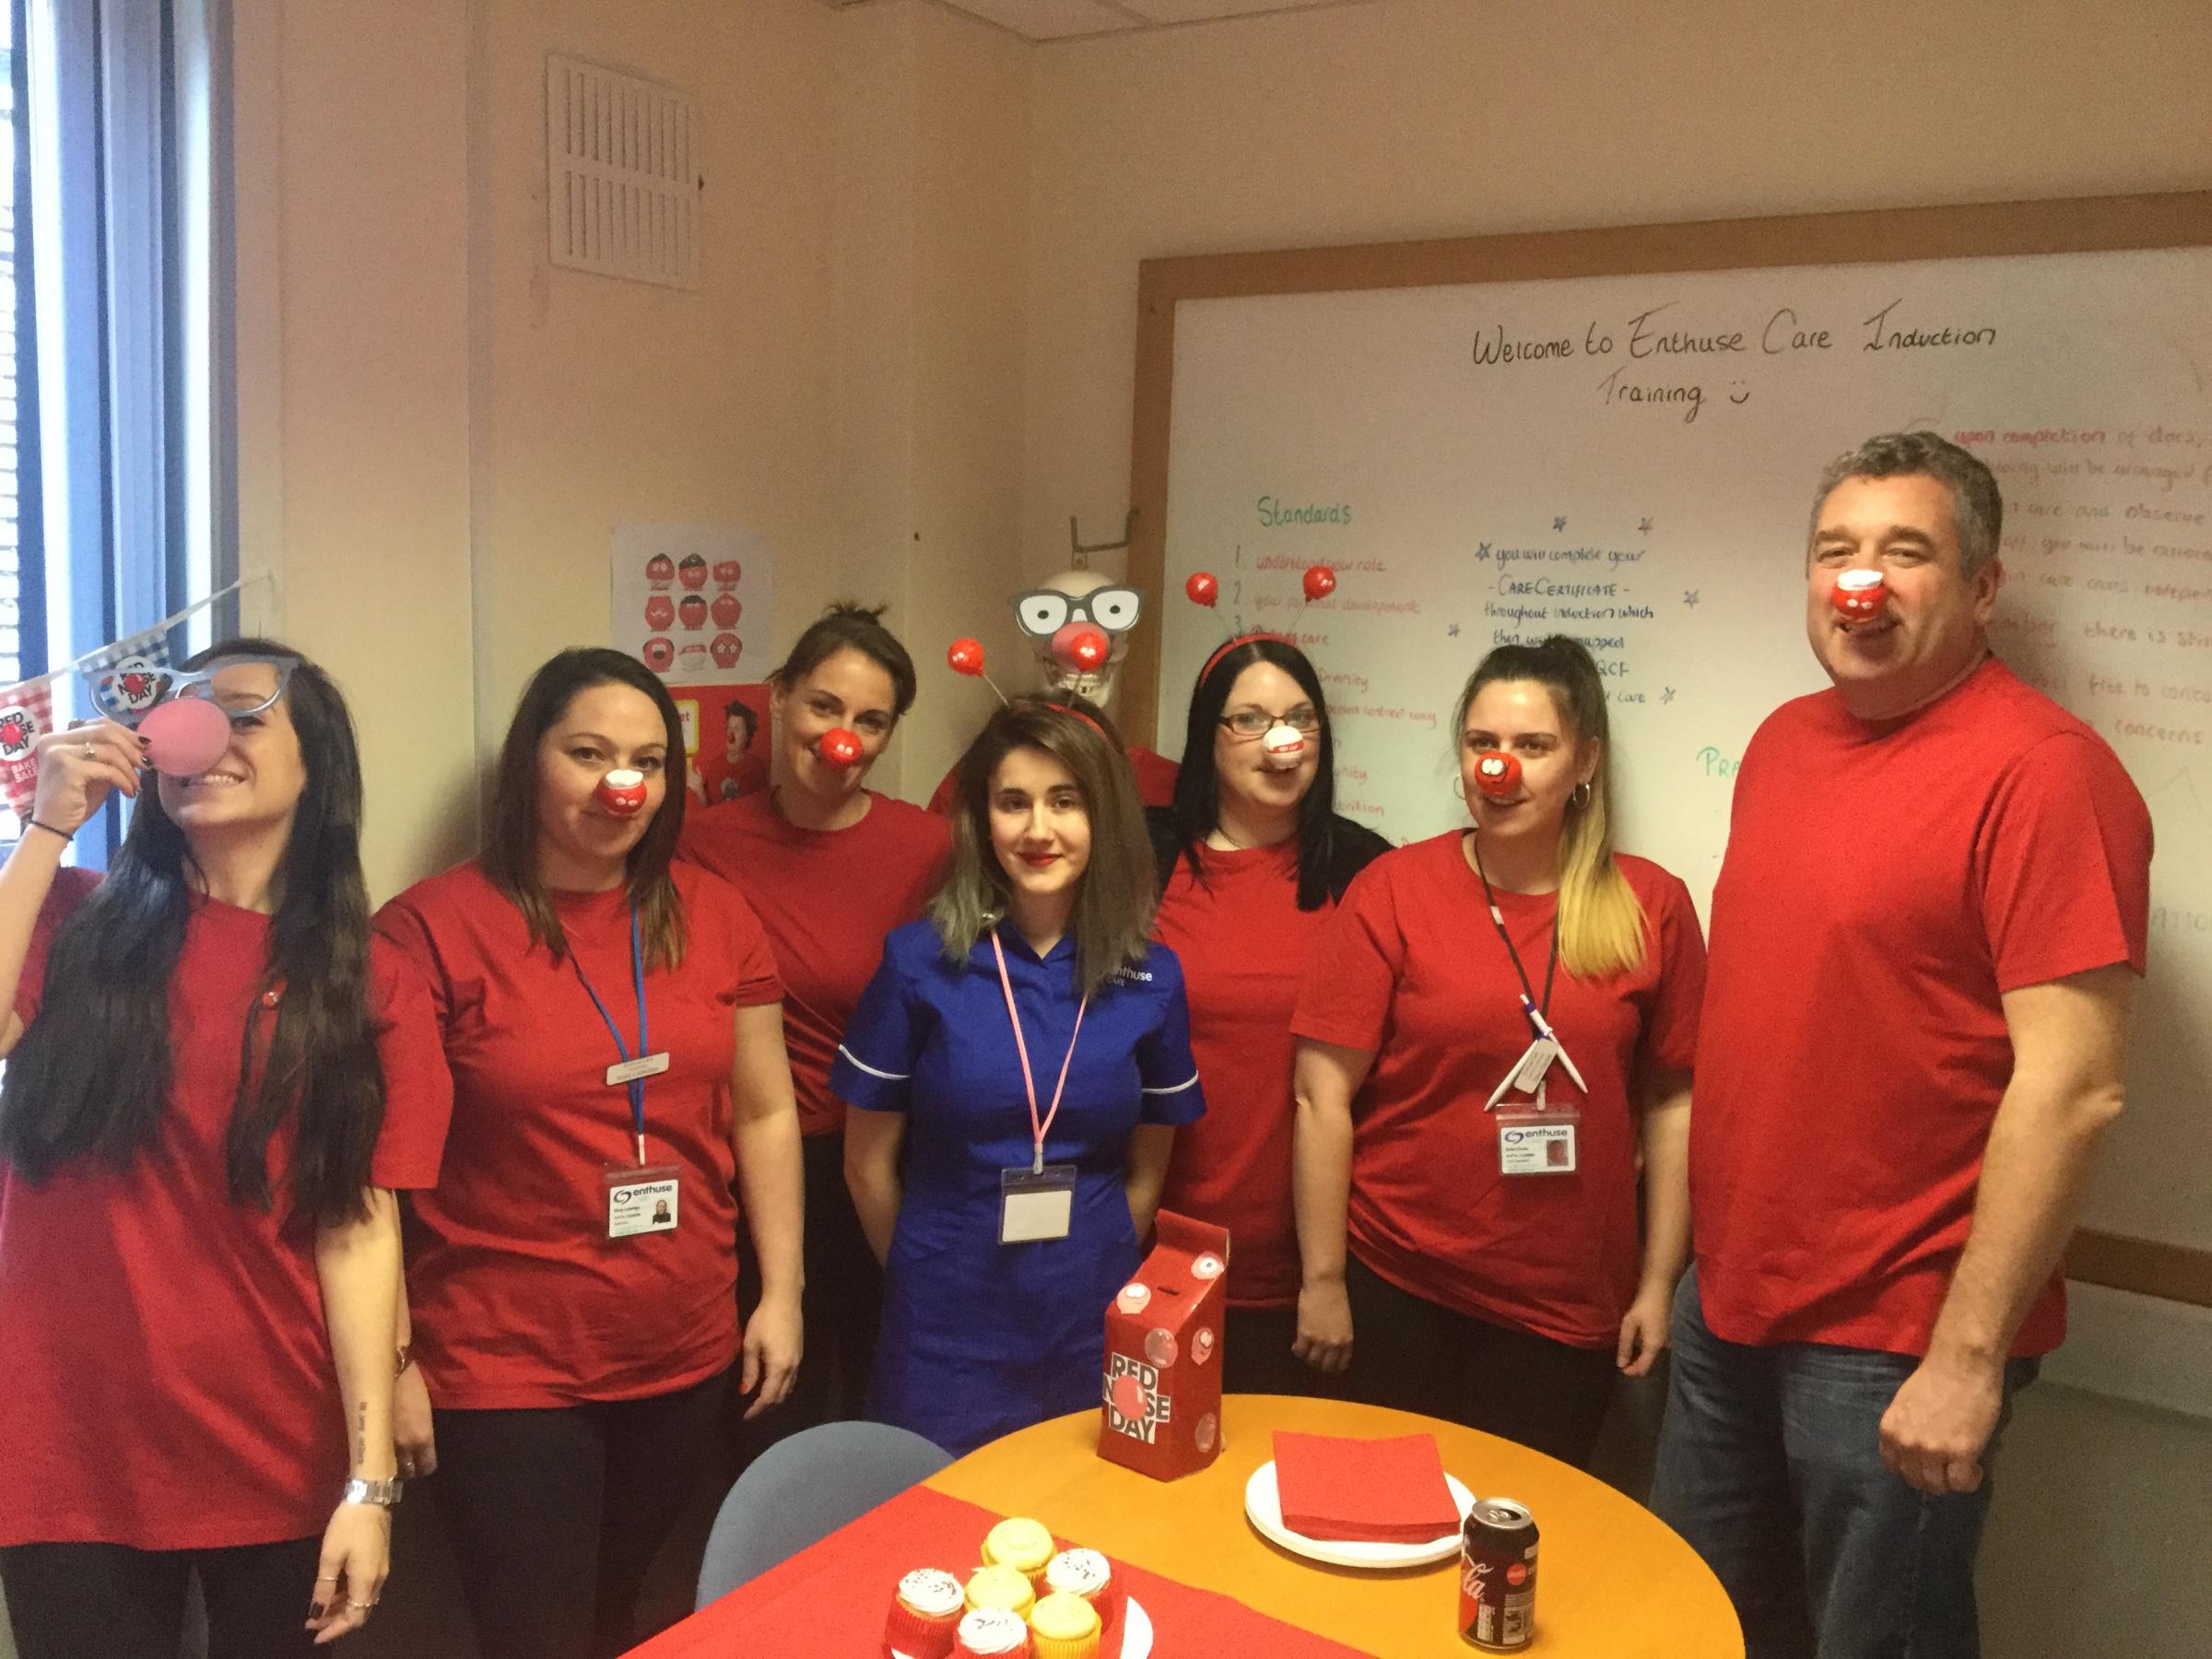 VIDEO: Care workers in Southampton have cakes and competitions for Comic Relief - Daily Echo